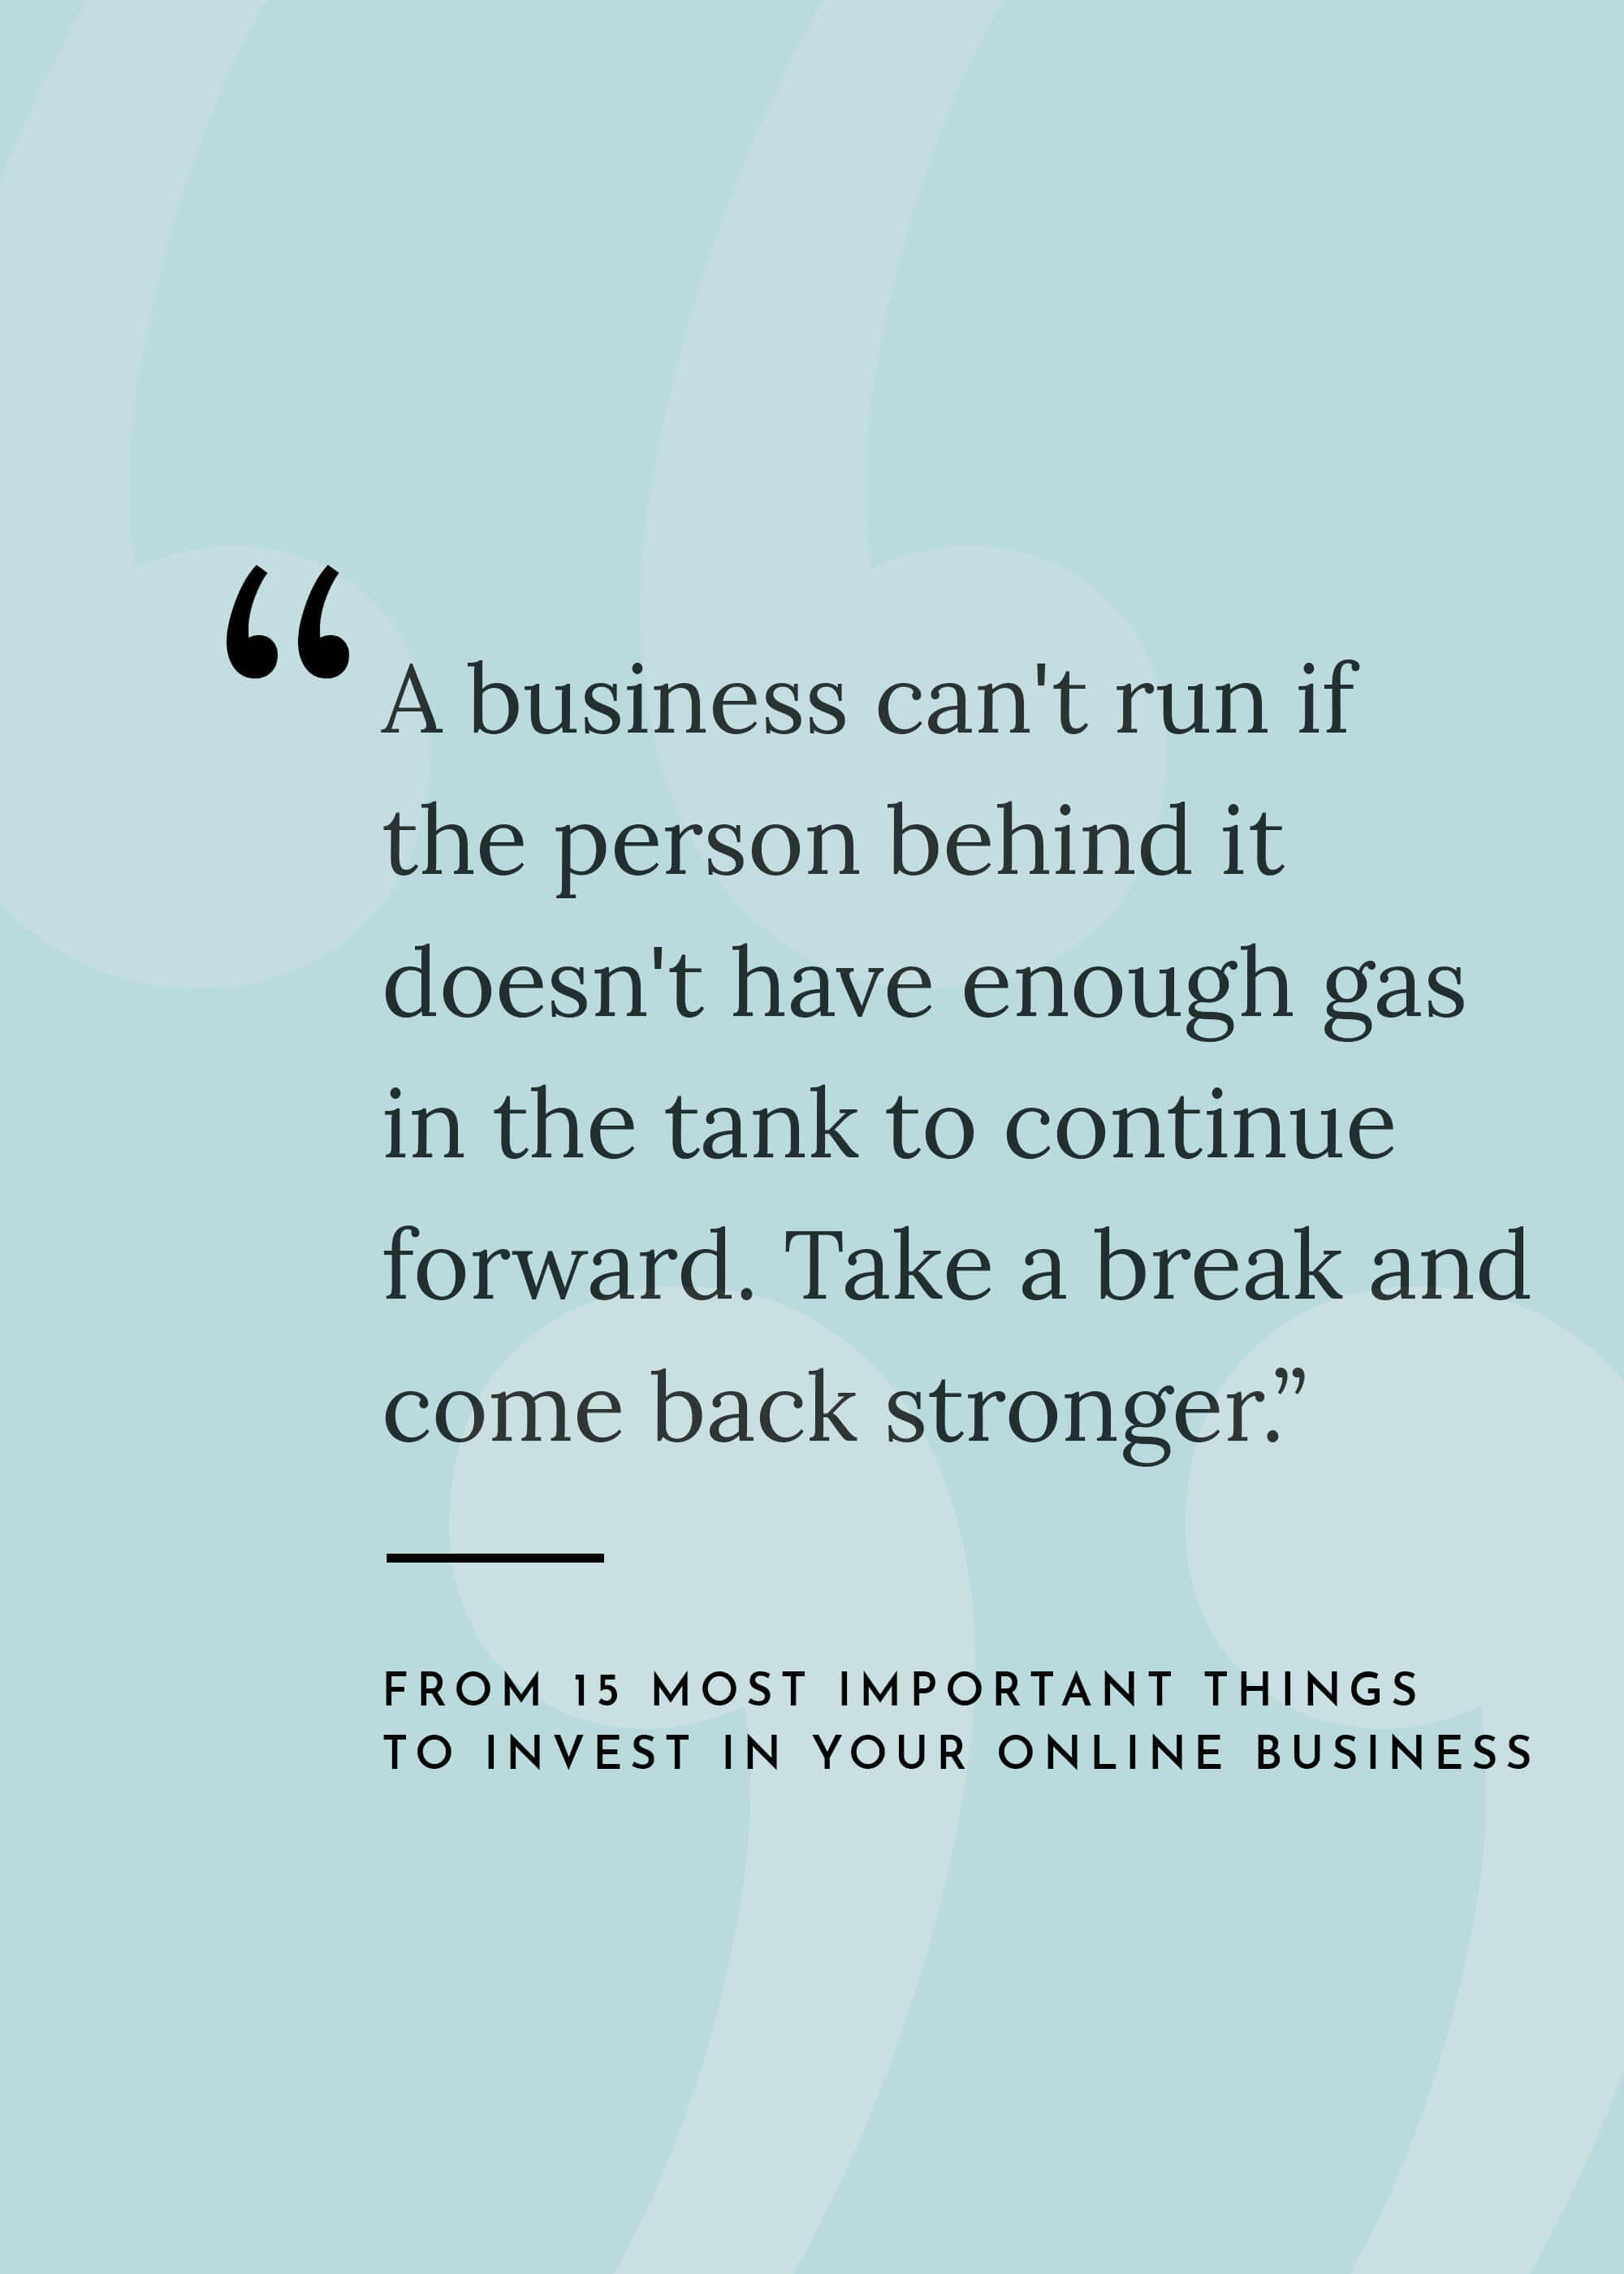 15 Most Important Things to Invest In Your Online Business